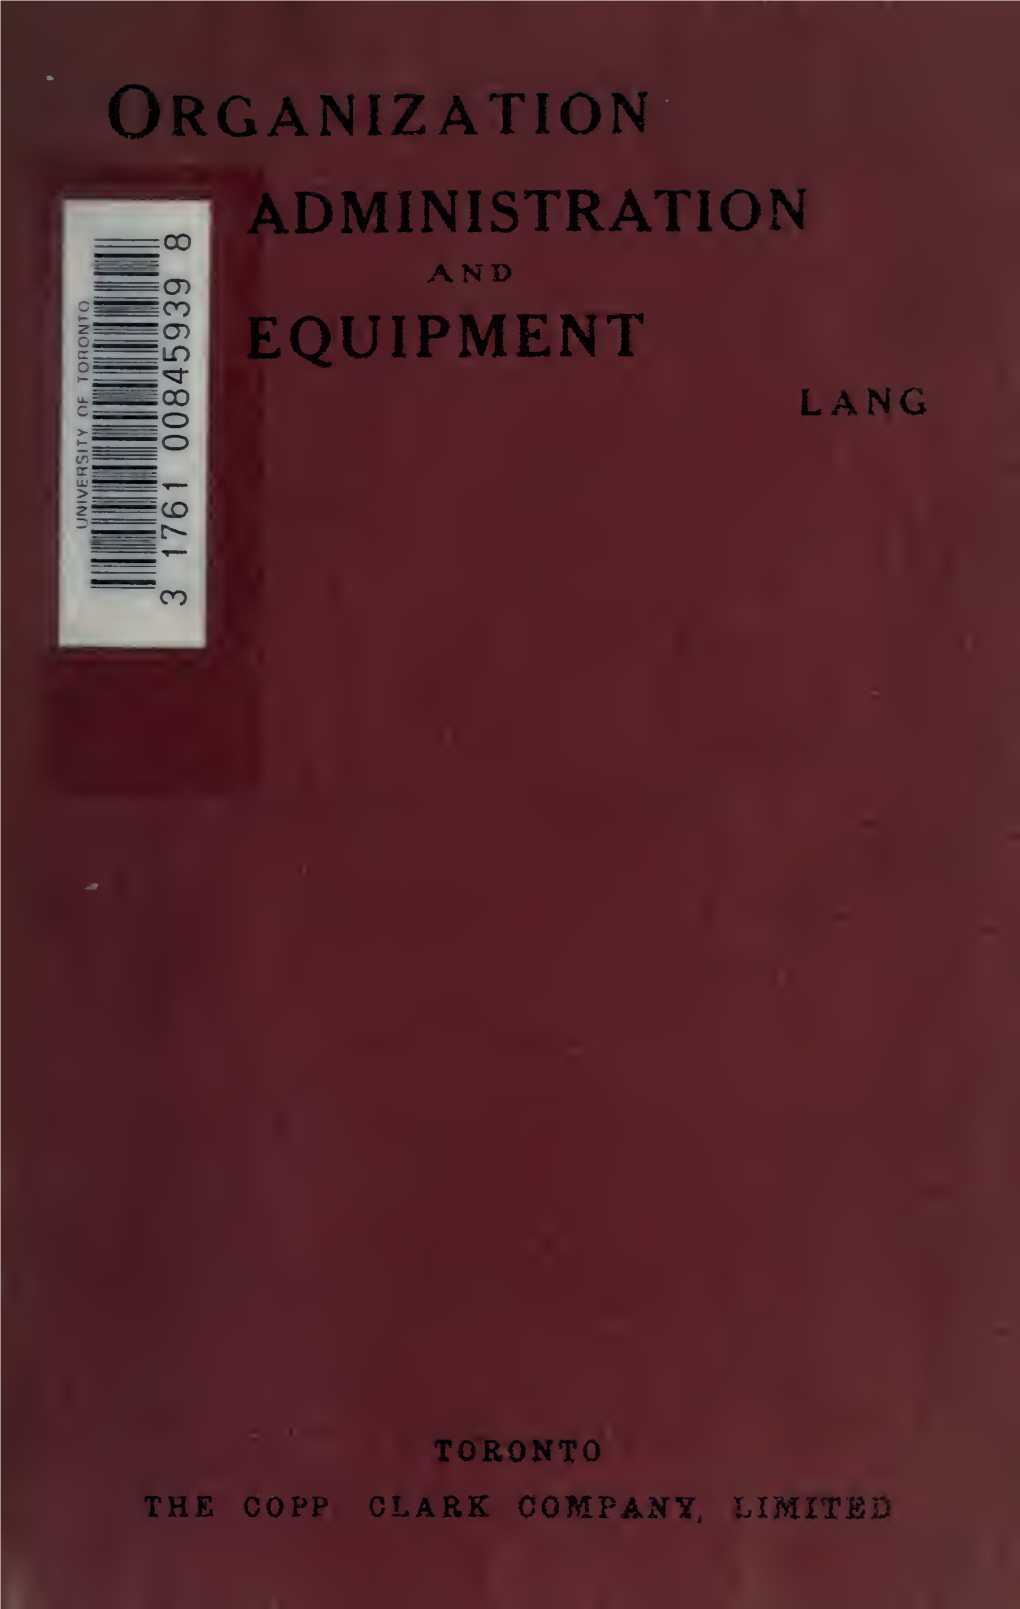 Organization, Administration and Equipment of His Majesty's Forces